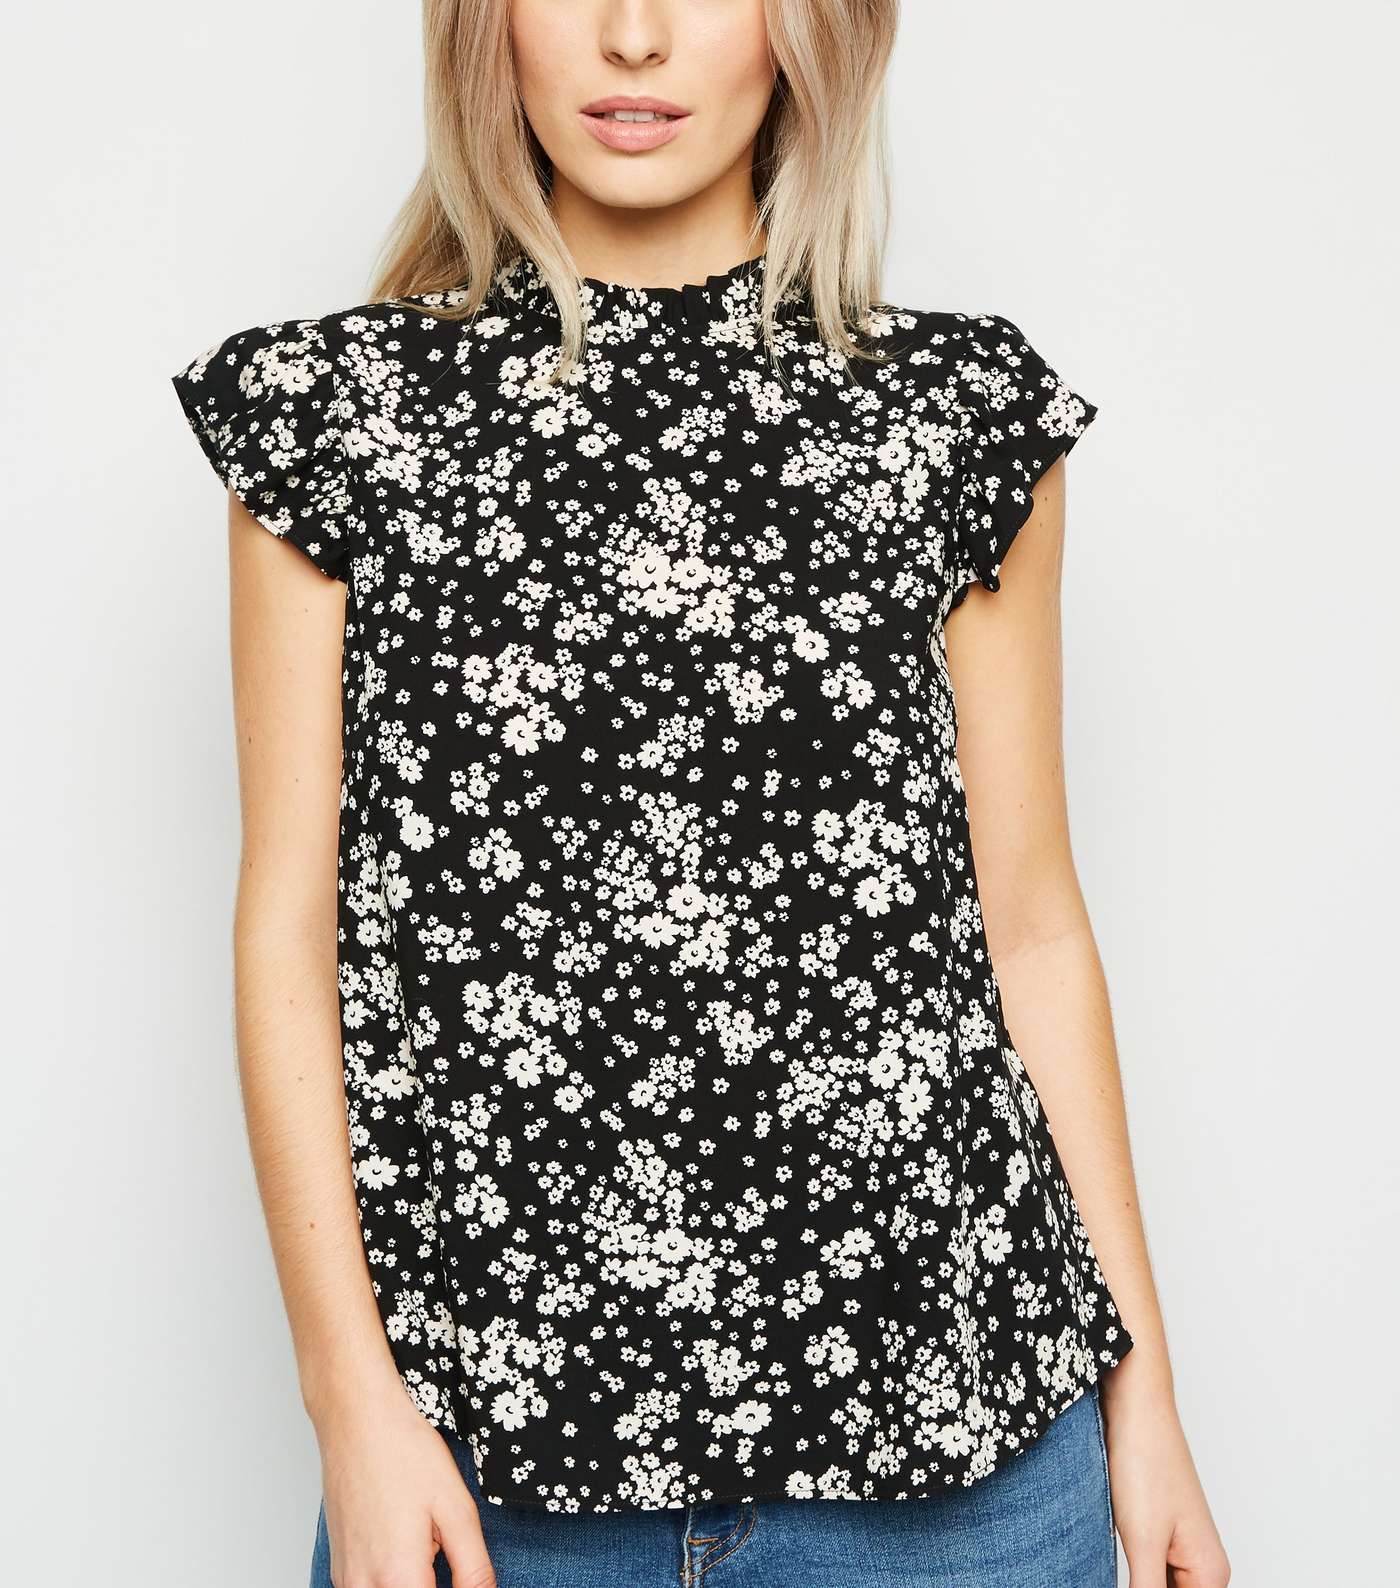 Petite Black Ditsy Floral High Neck Frill Top